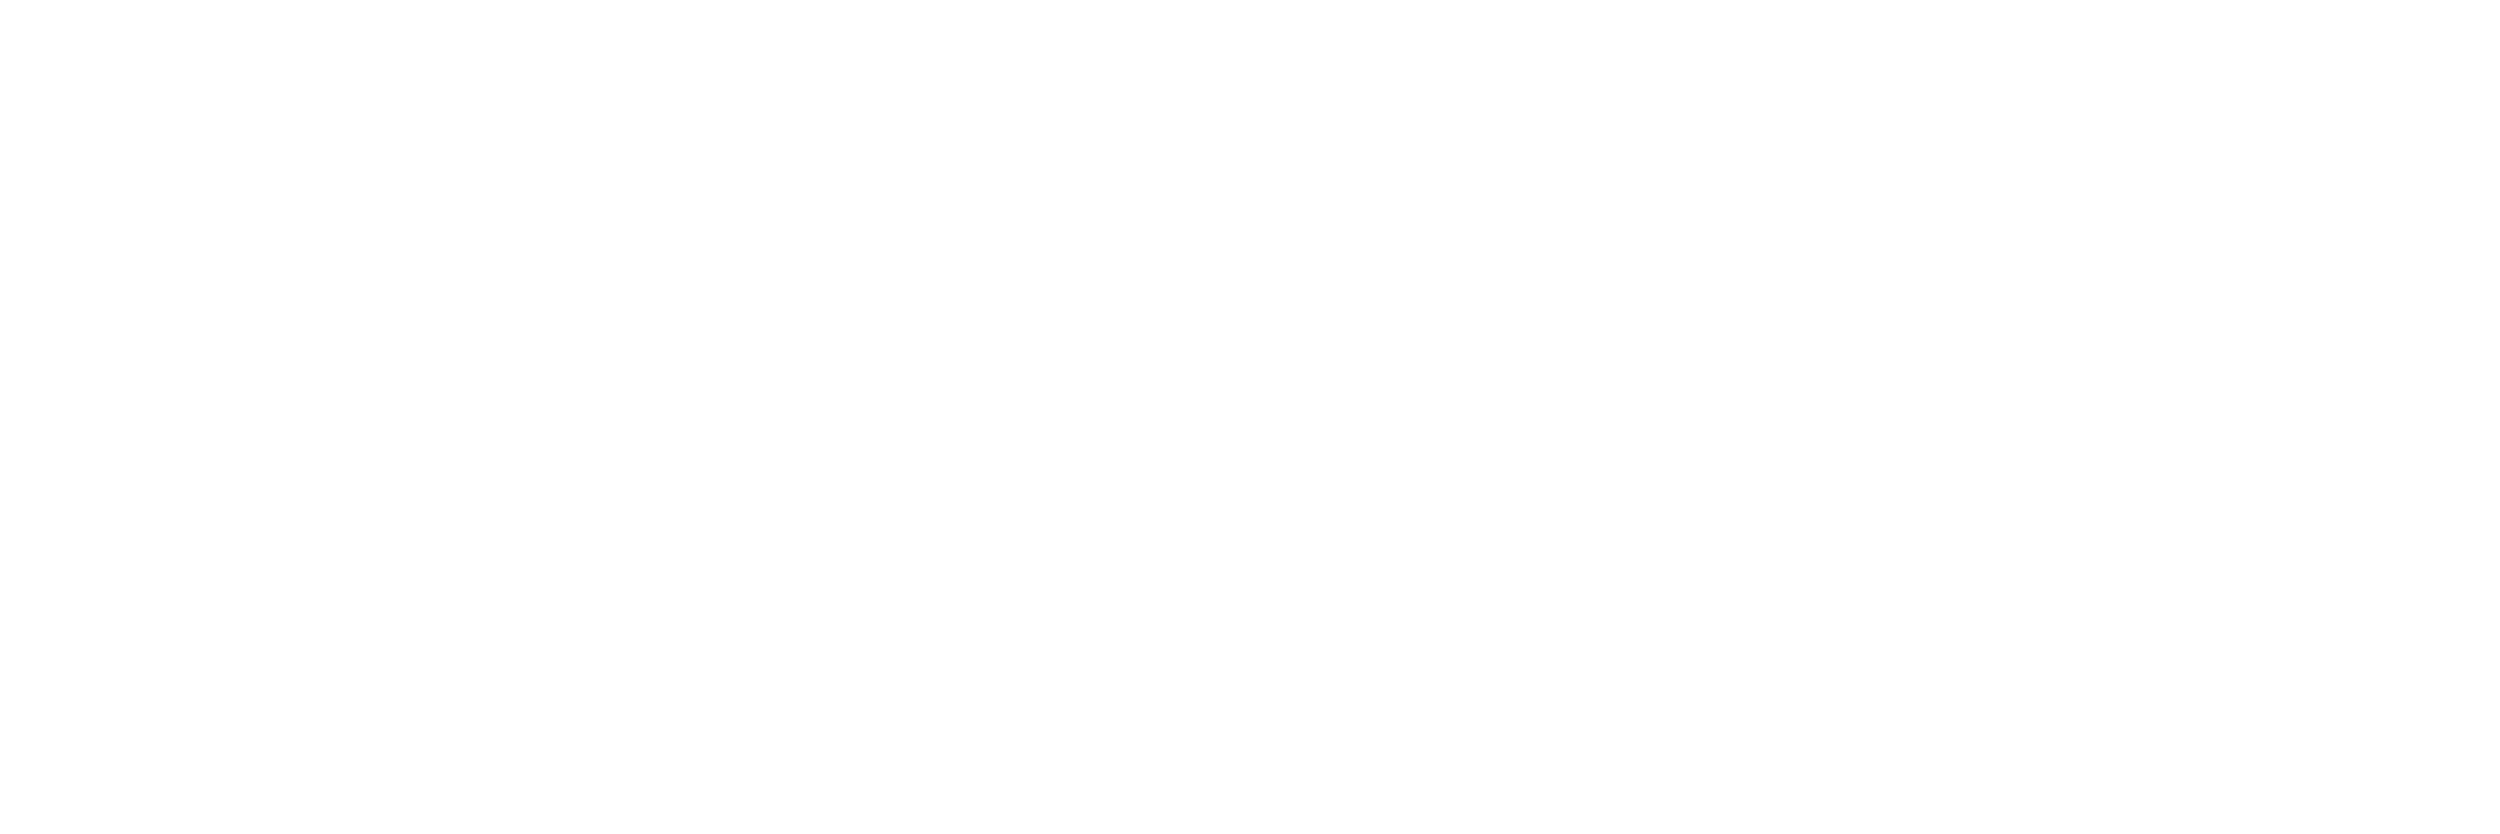 tag-observability_horizontal-white.png